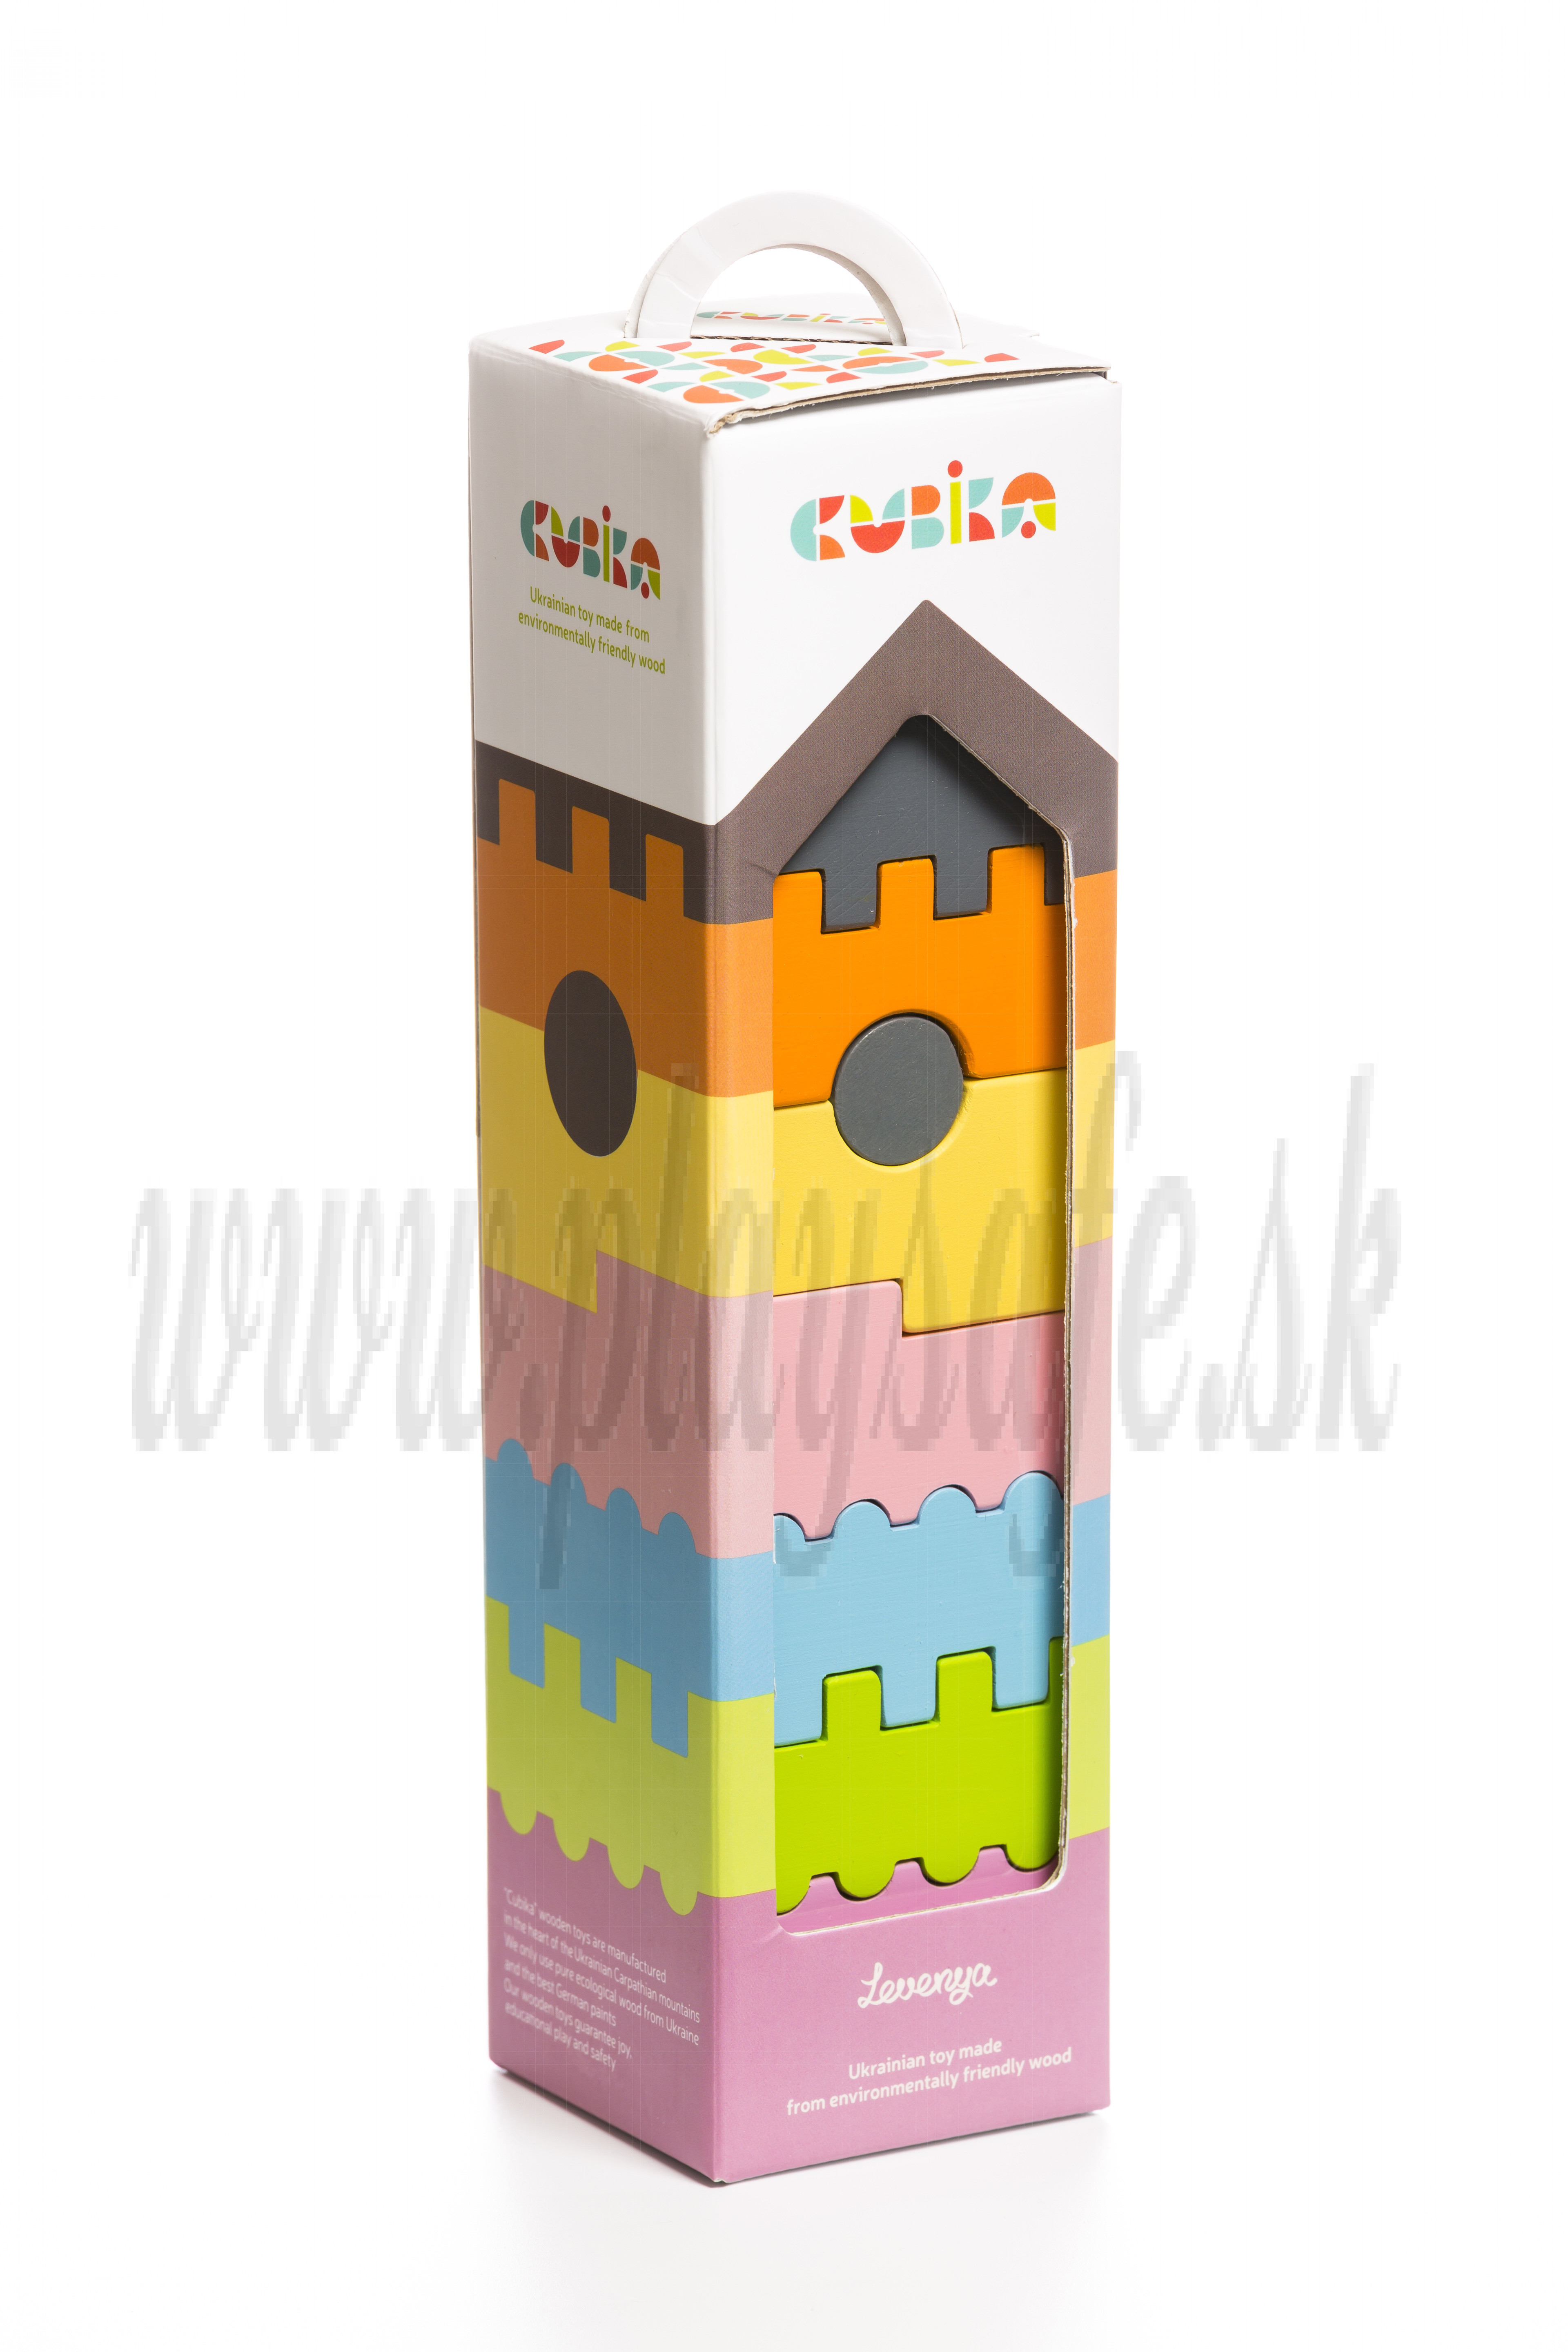 Cubika Wooden Building Toy Tower, 8 pieces